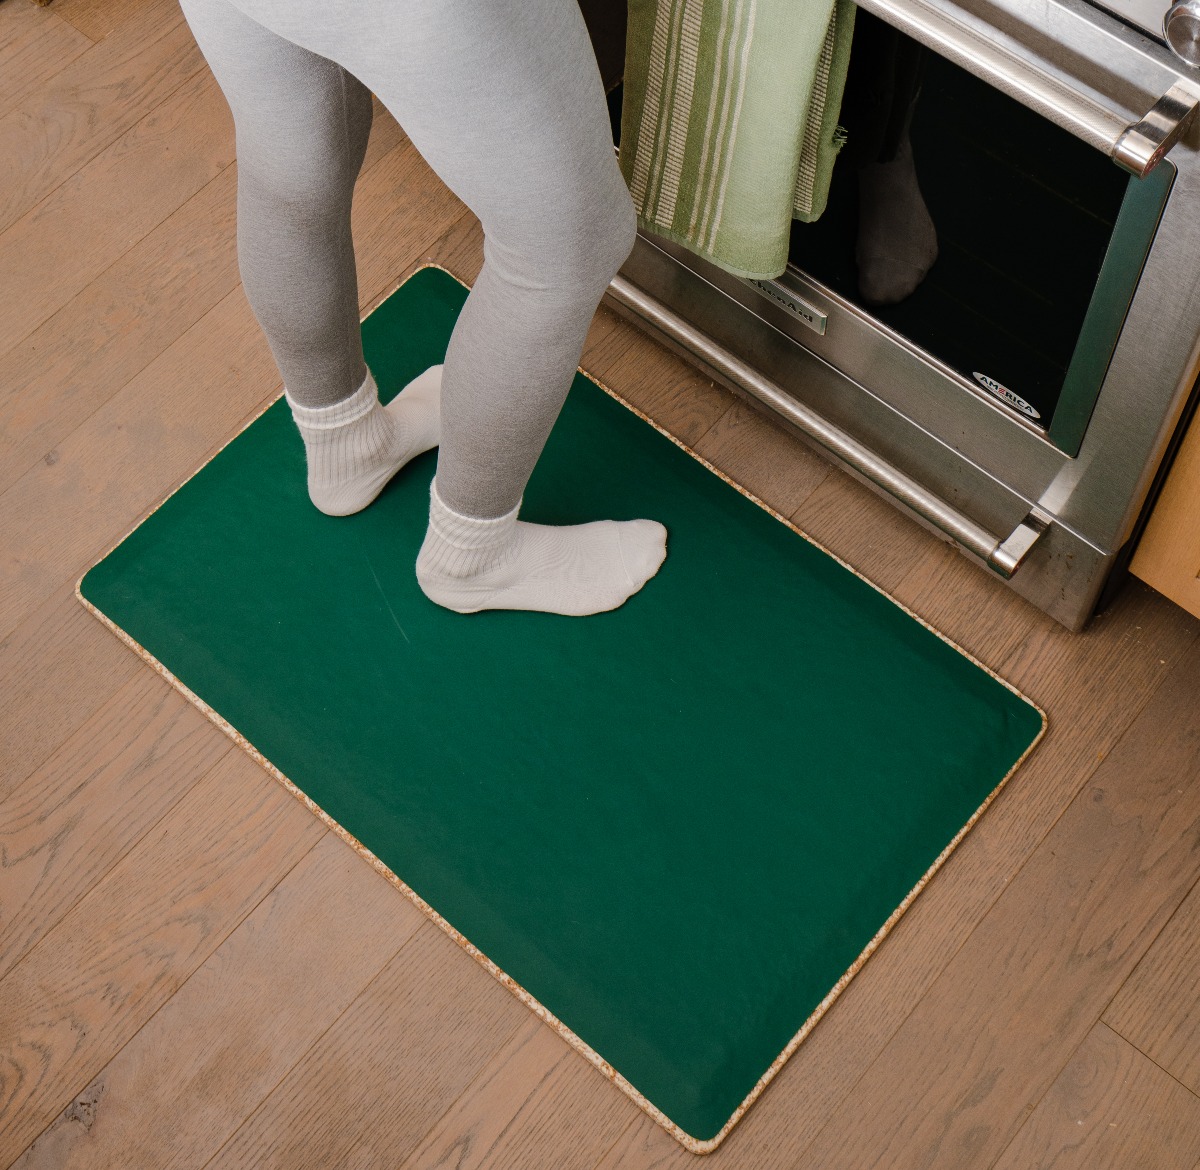 Extra Large Anti-Fatigue Mats are Oversized Comfort Mats by American Floor  Mats